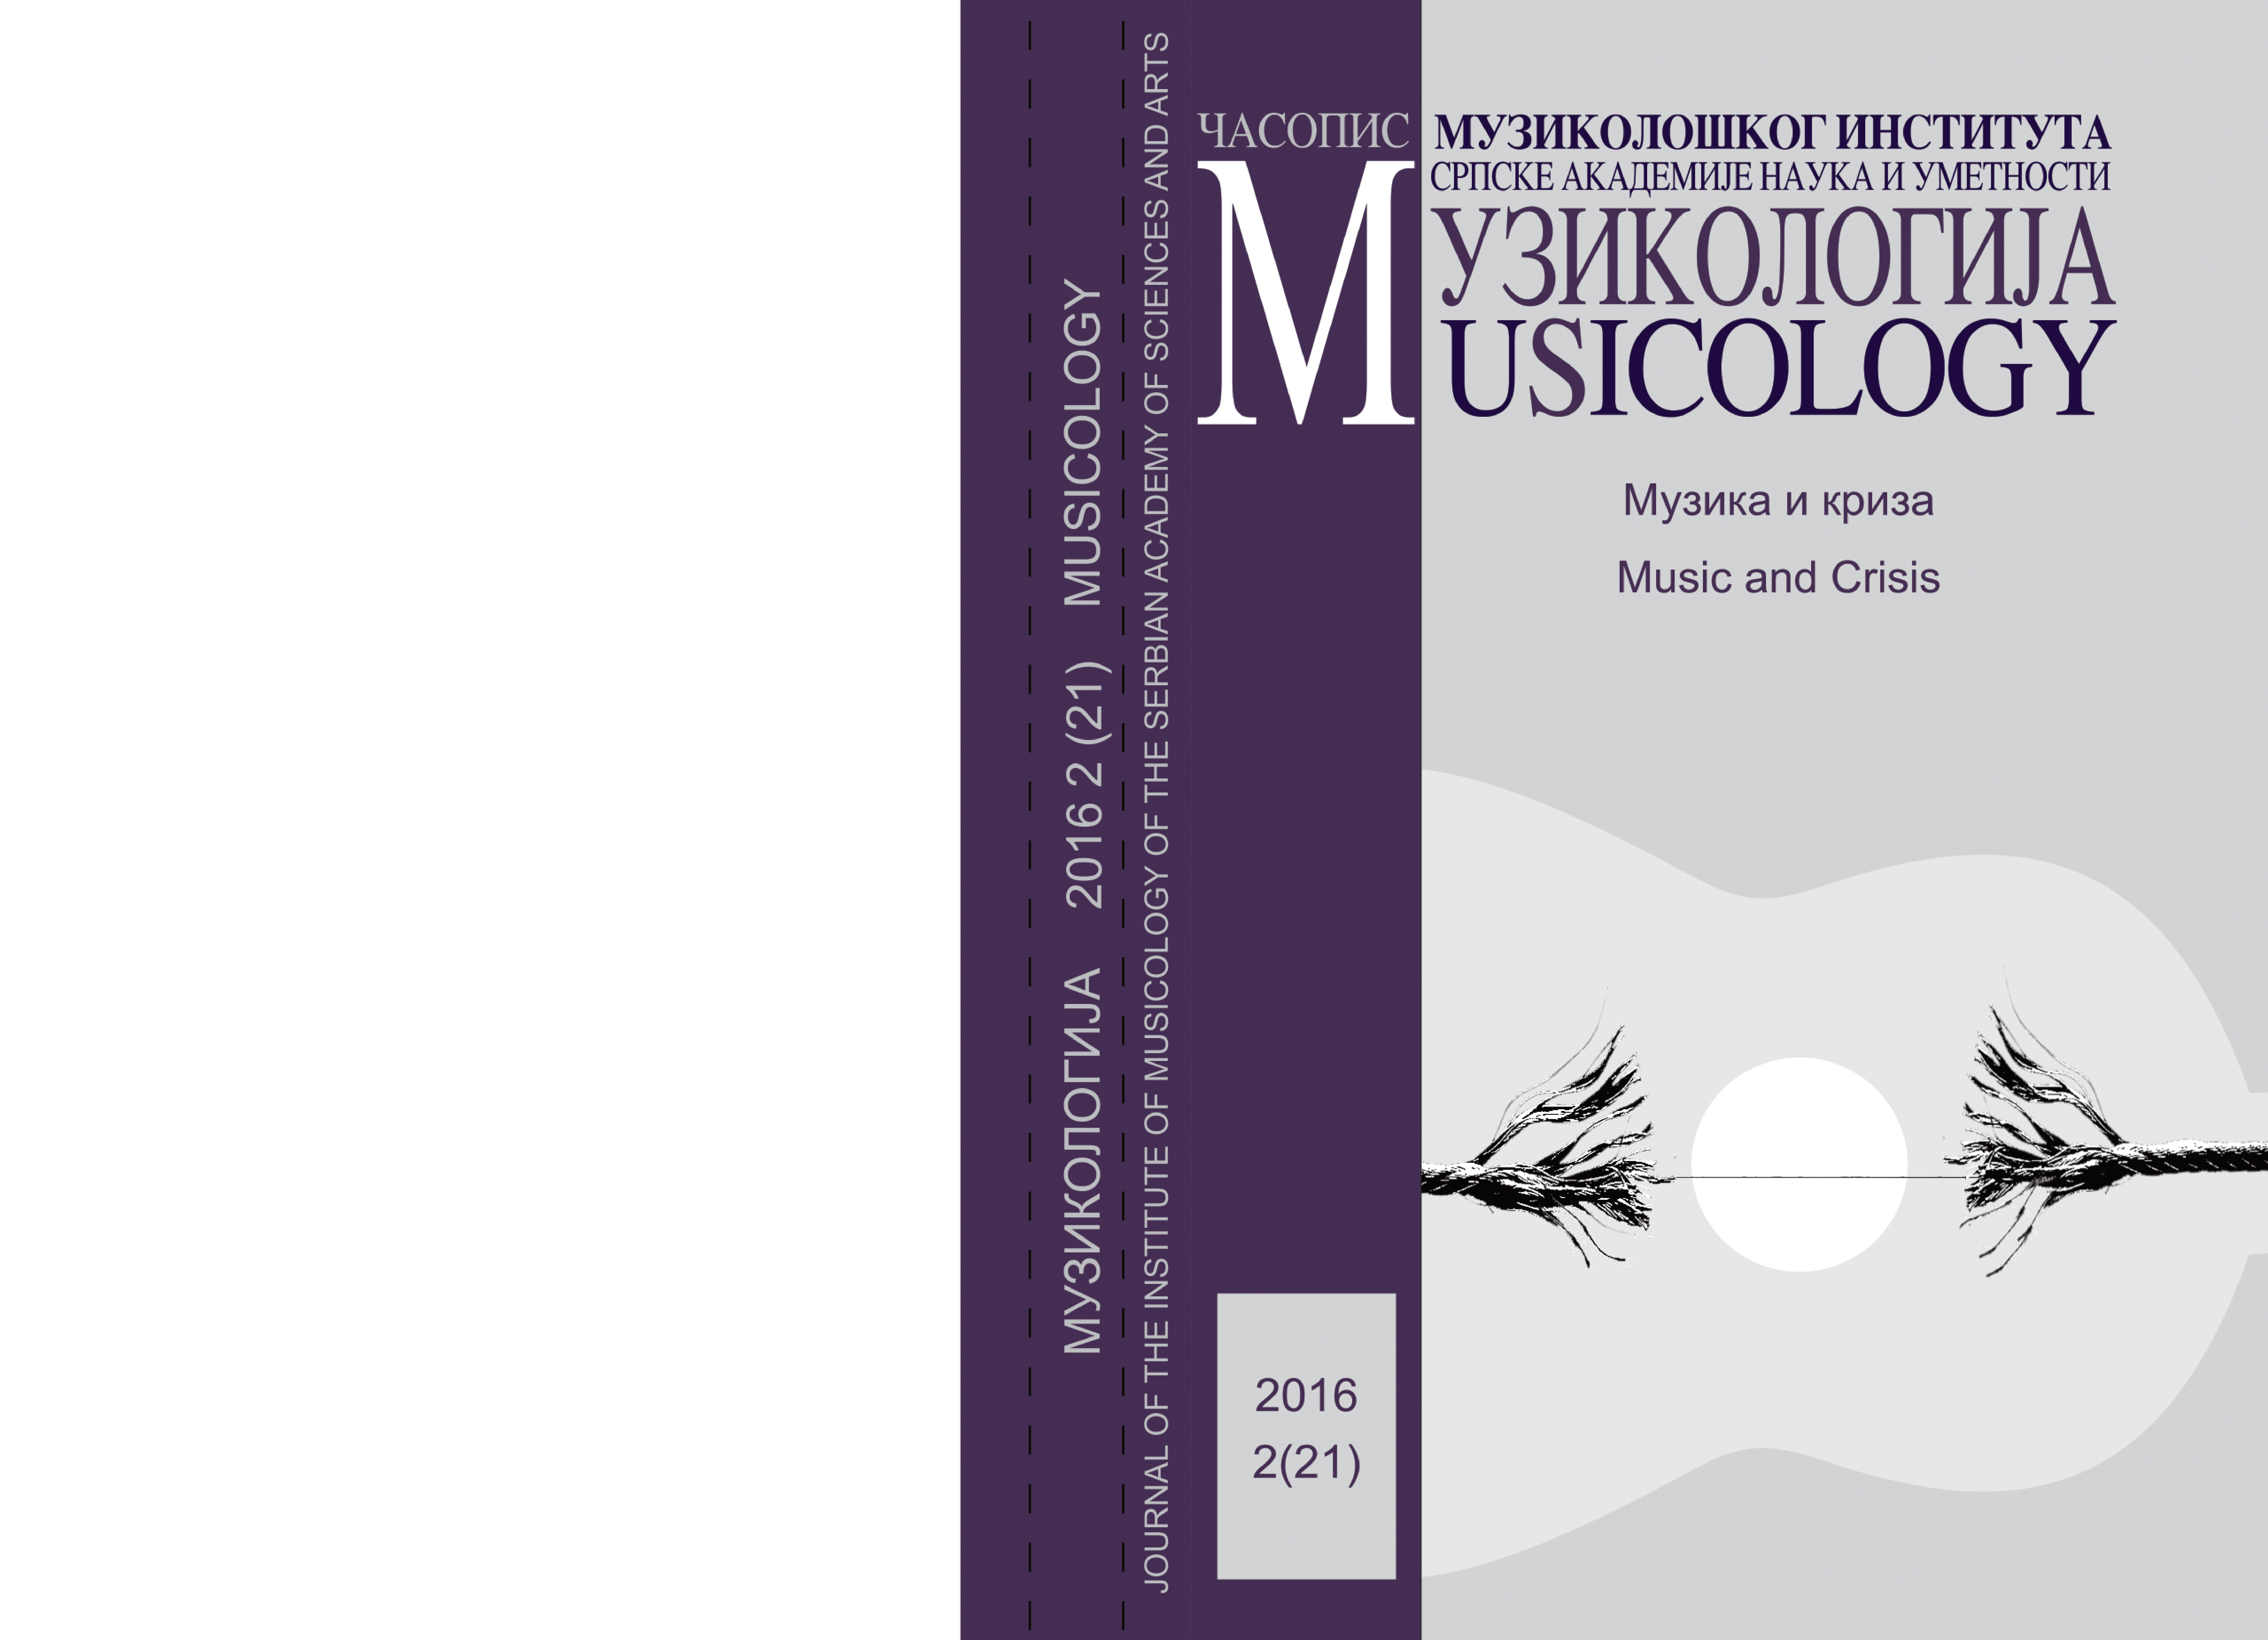 Cover image for the Musicology journal no. 21